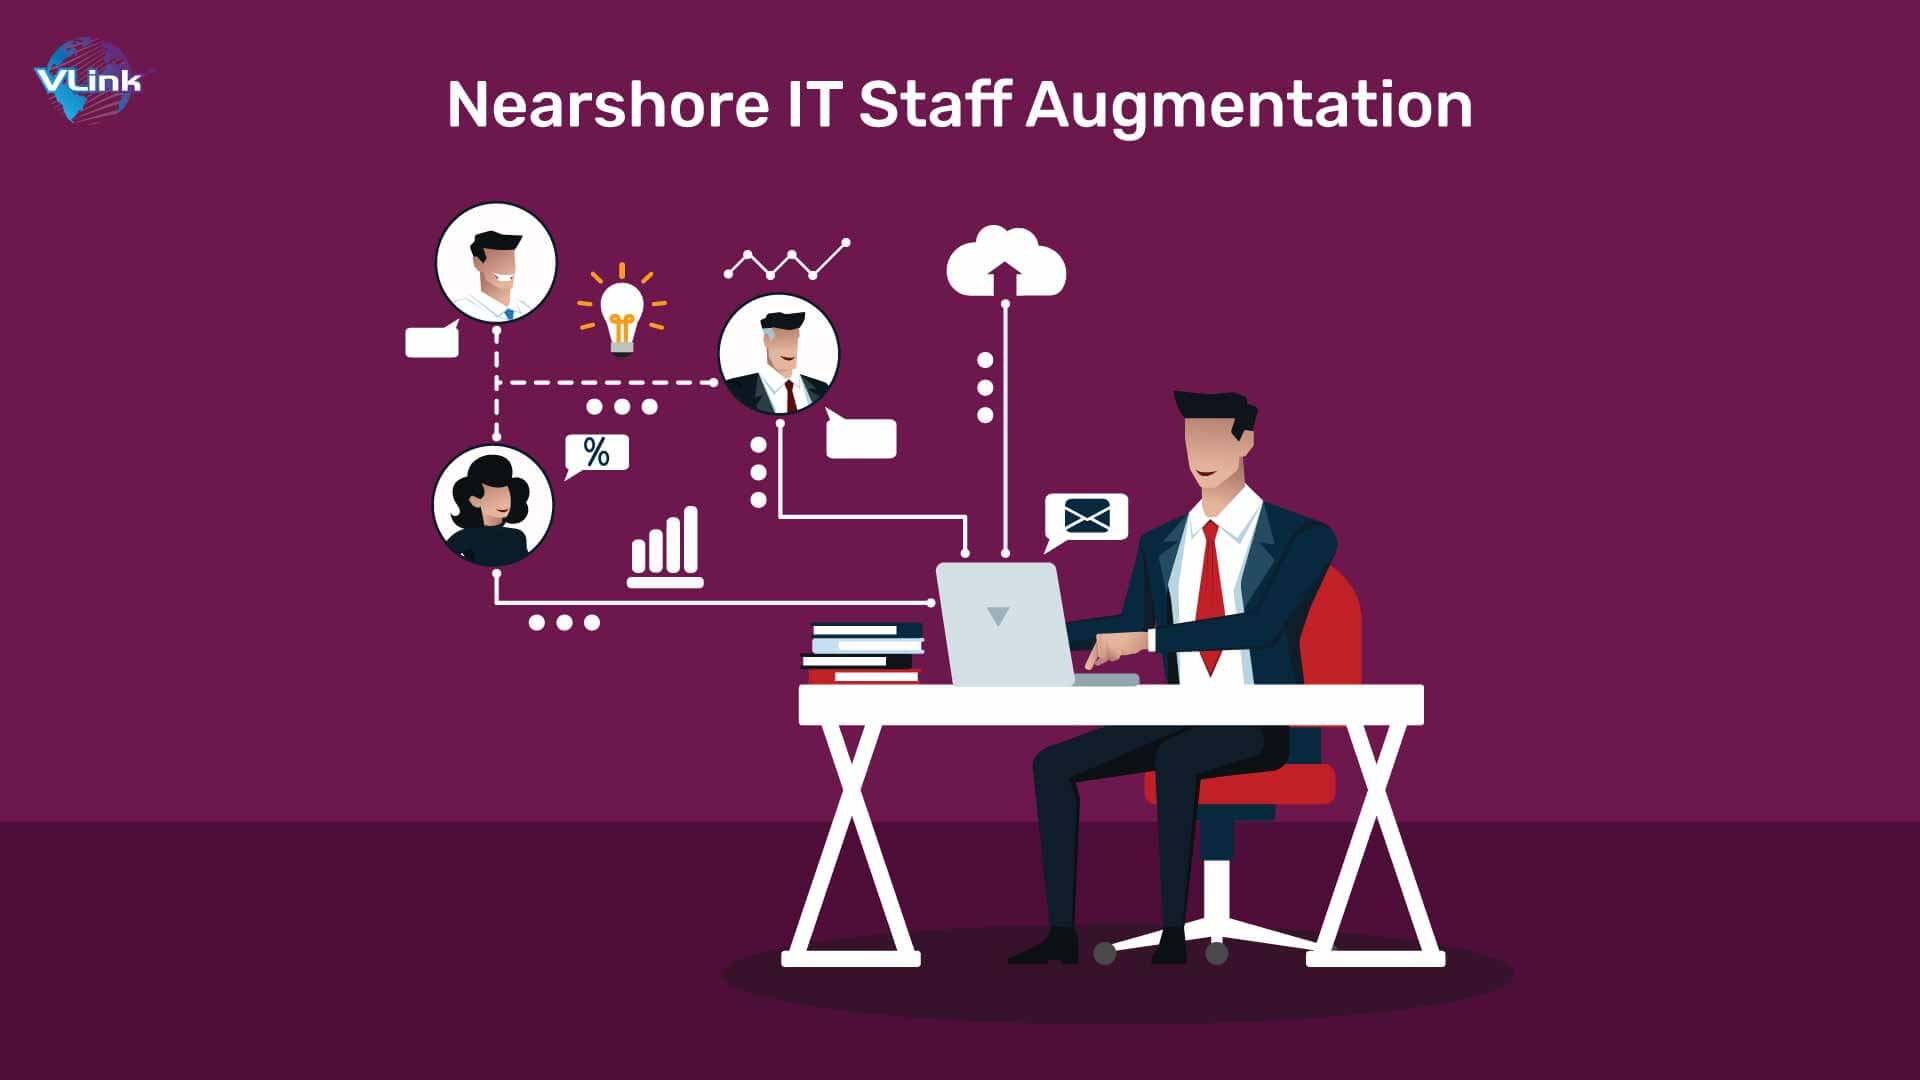 A Deep Dive into Nearshore IT Staff Augmentation